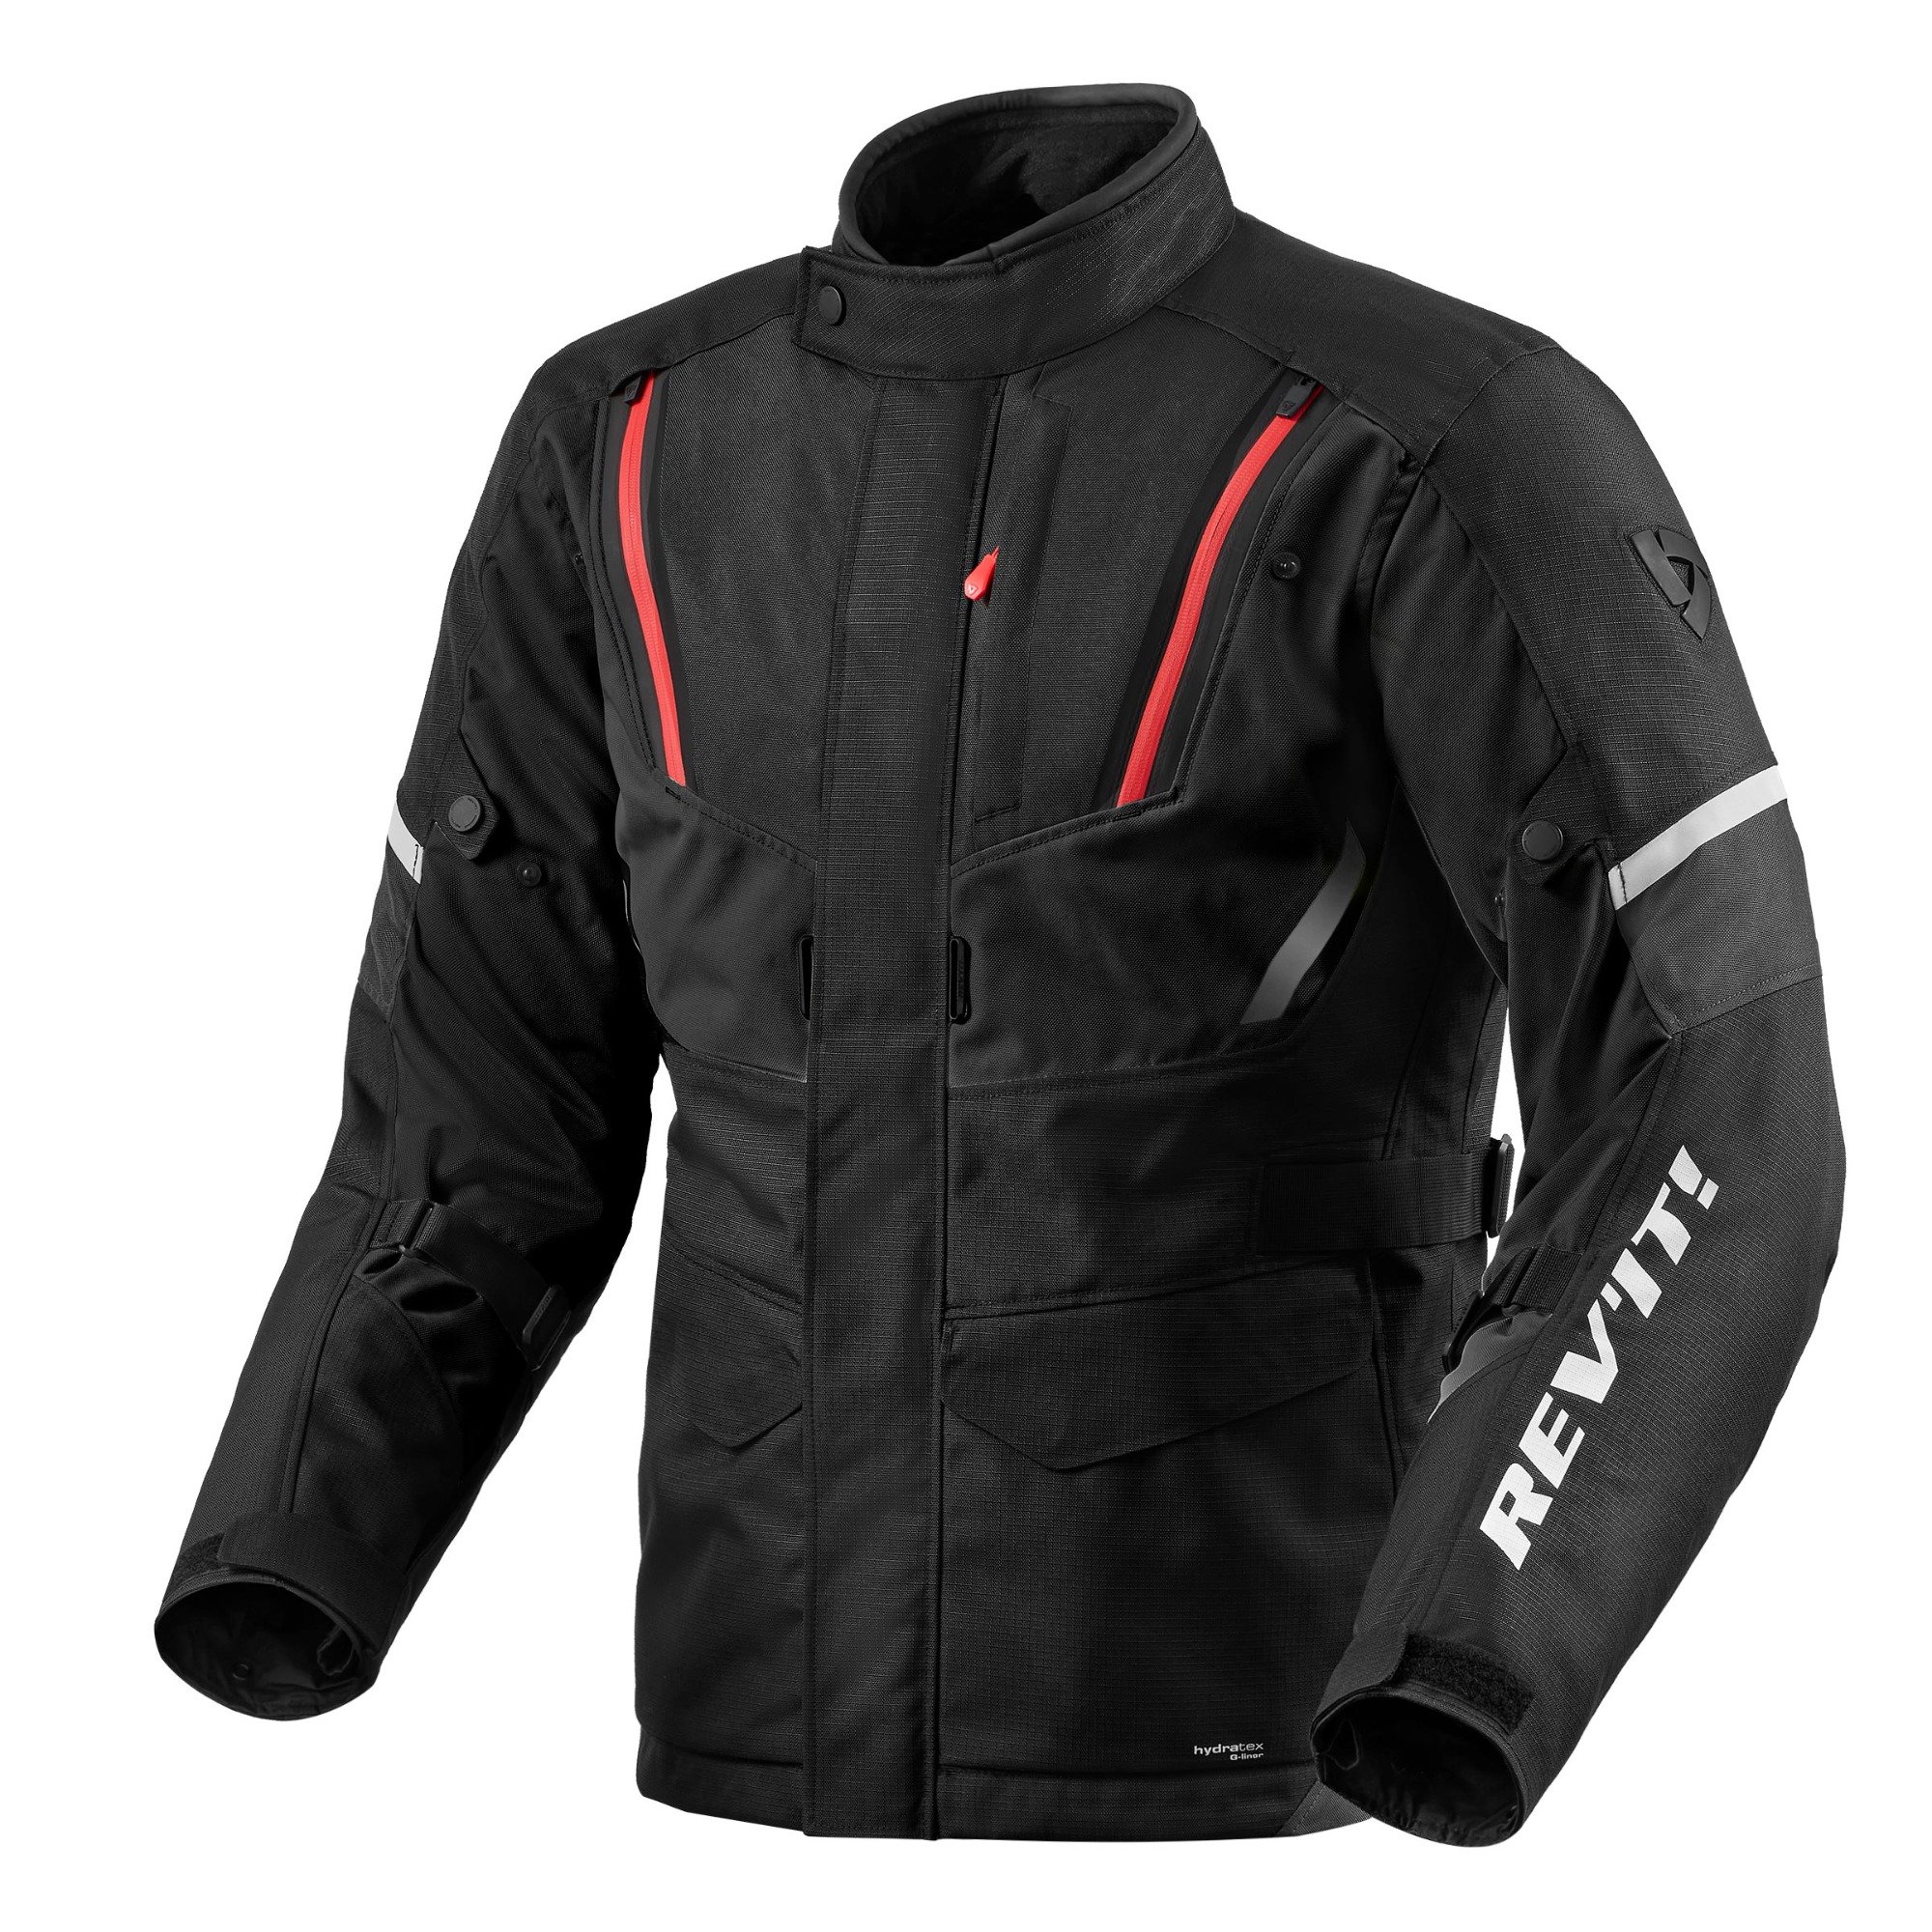 Image of REV'IT! Move H2O Jacket Black Size S ID 8700001332903